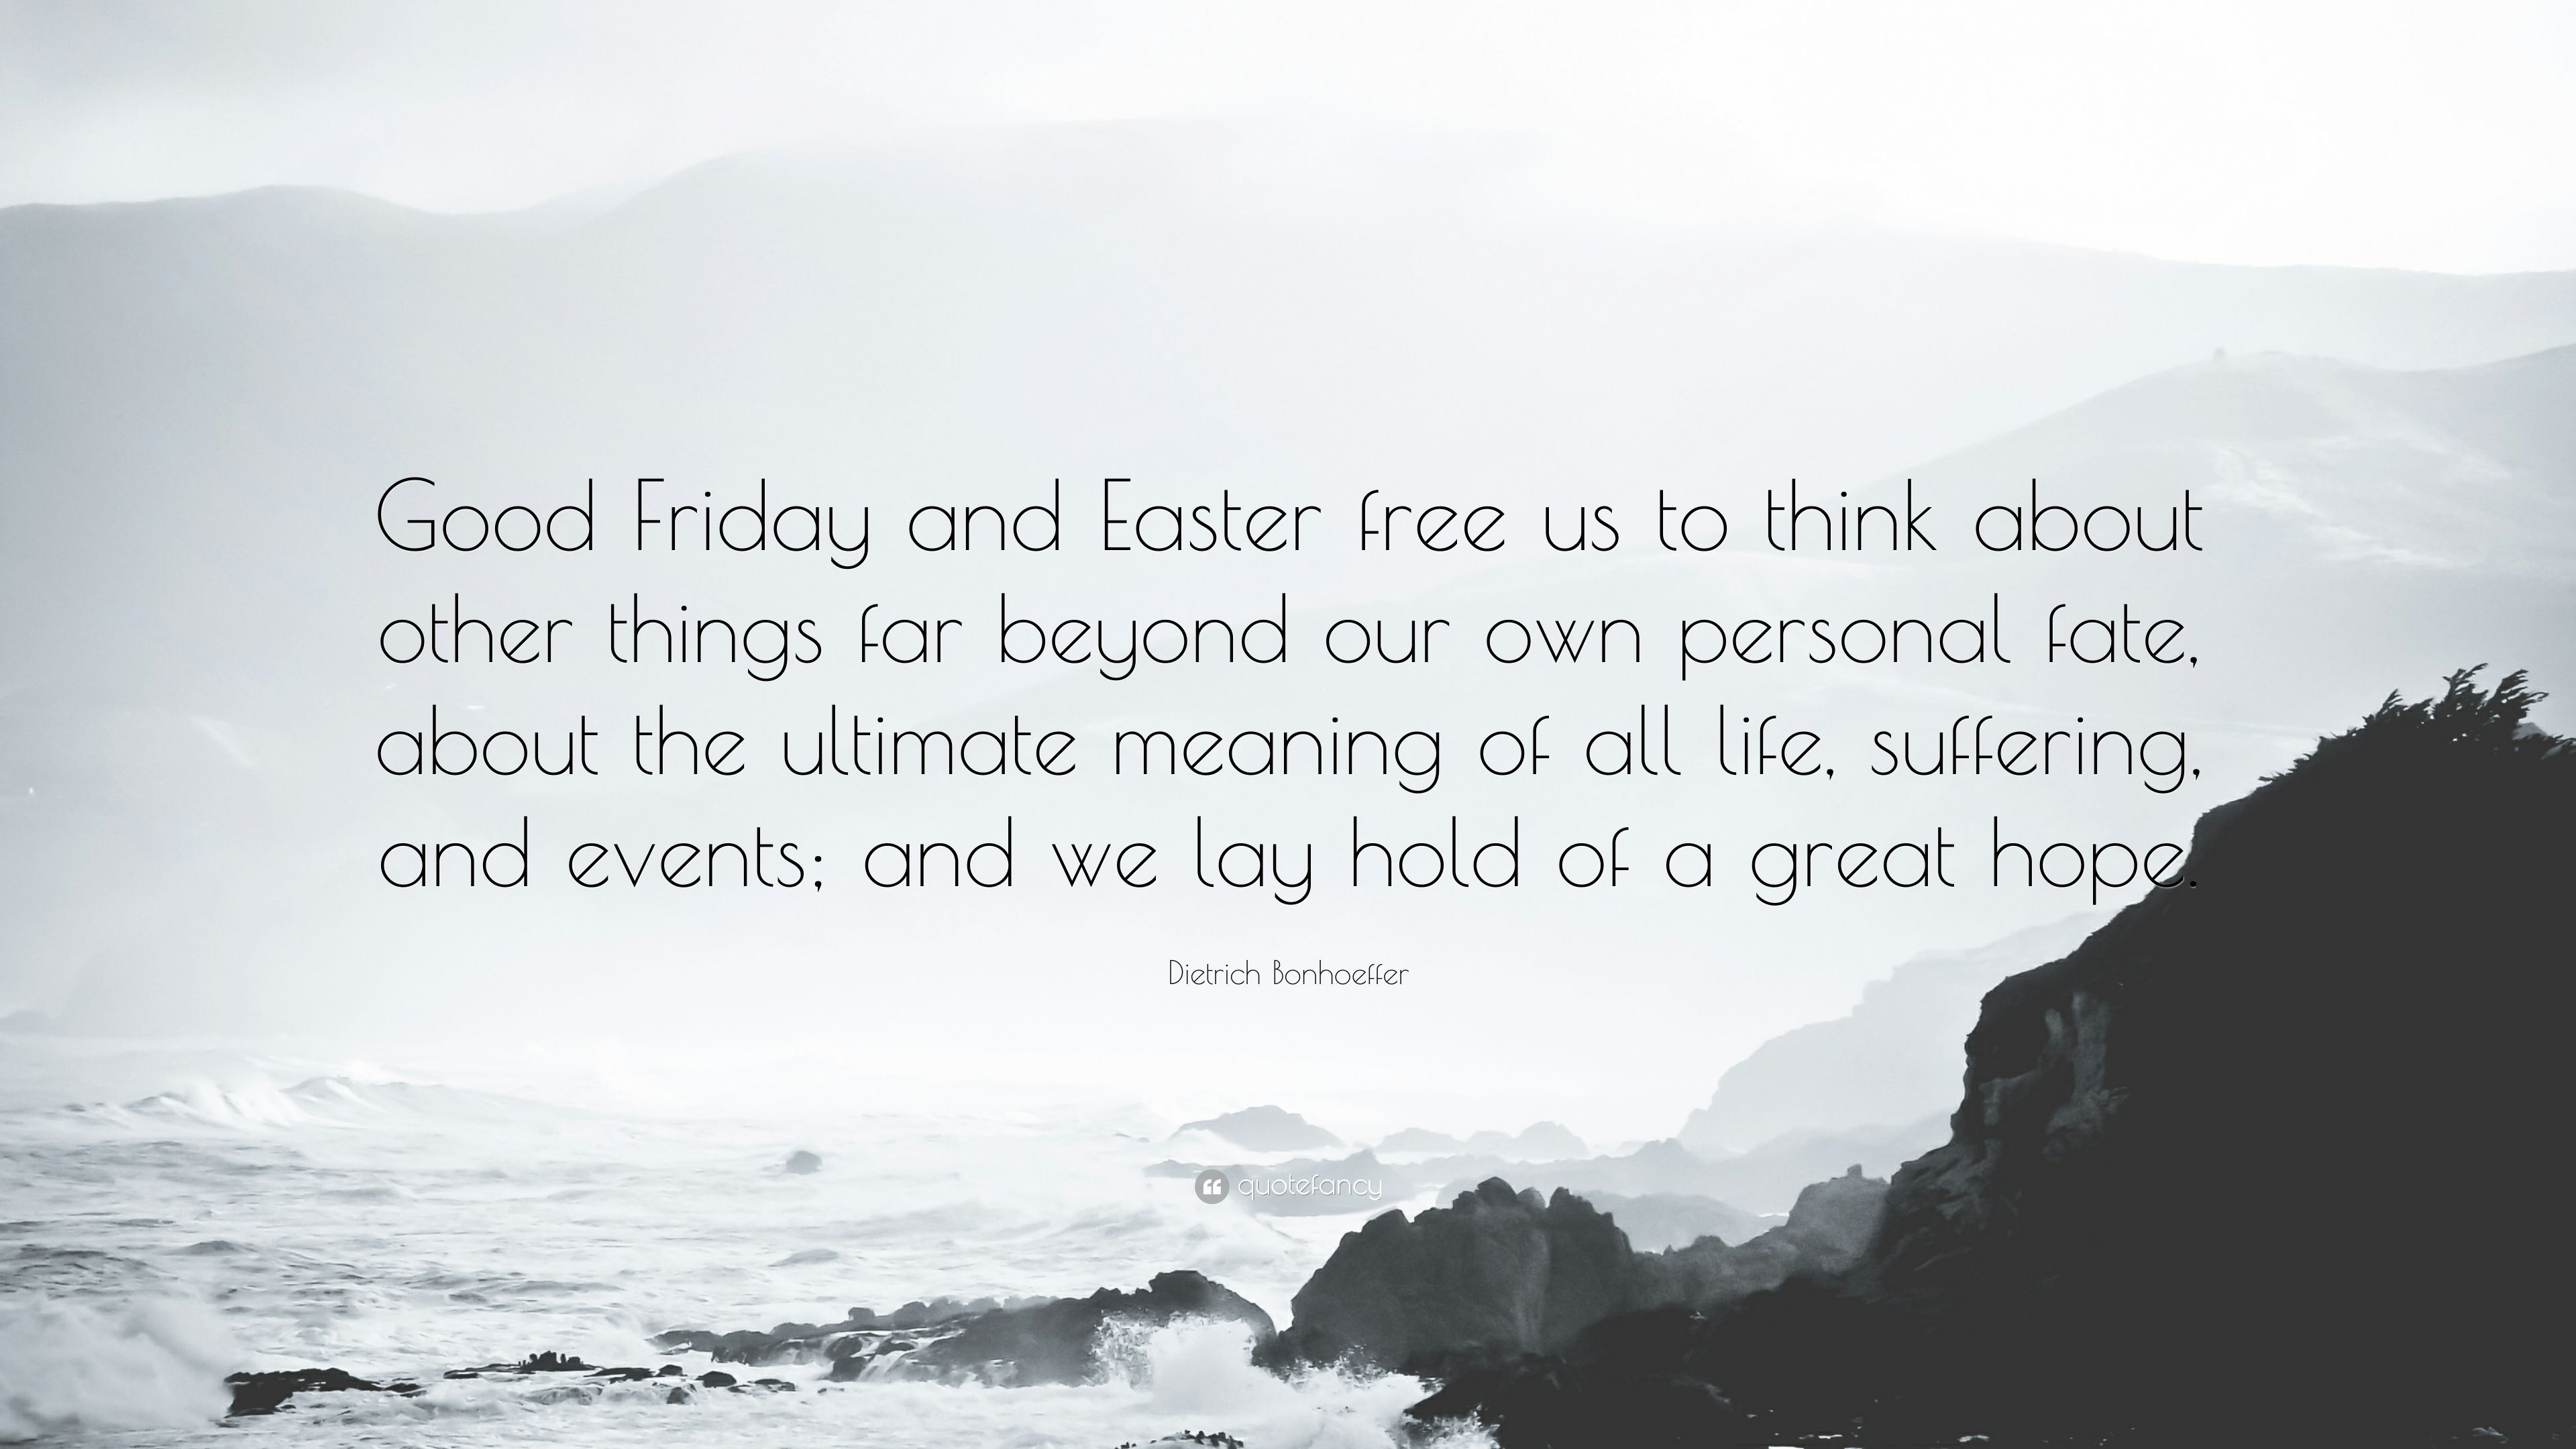 Dietrich Bonhoeffer Quote: “Good Friday and Easter free us to